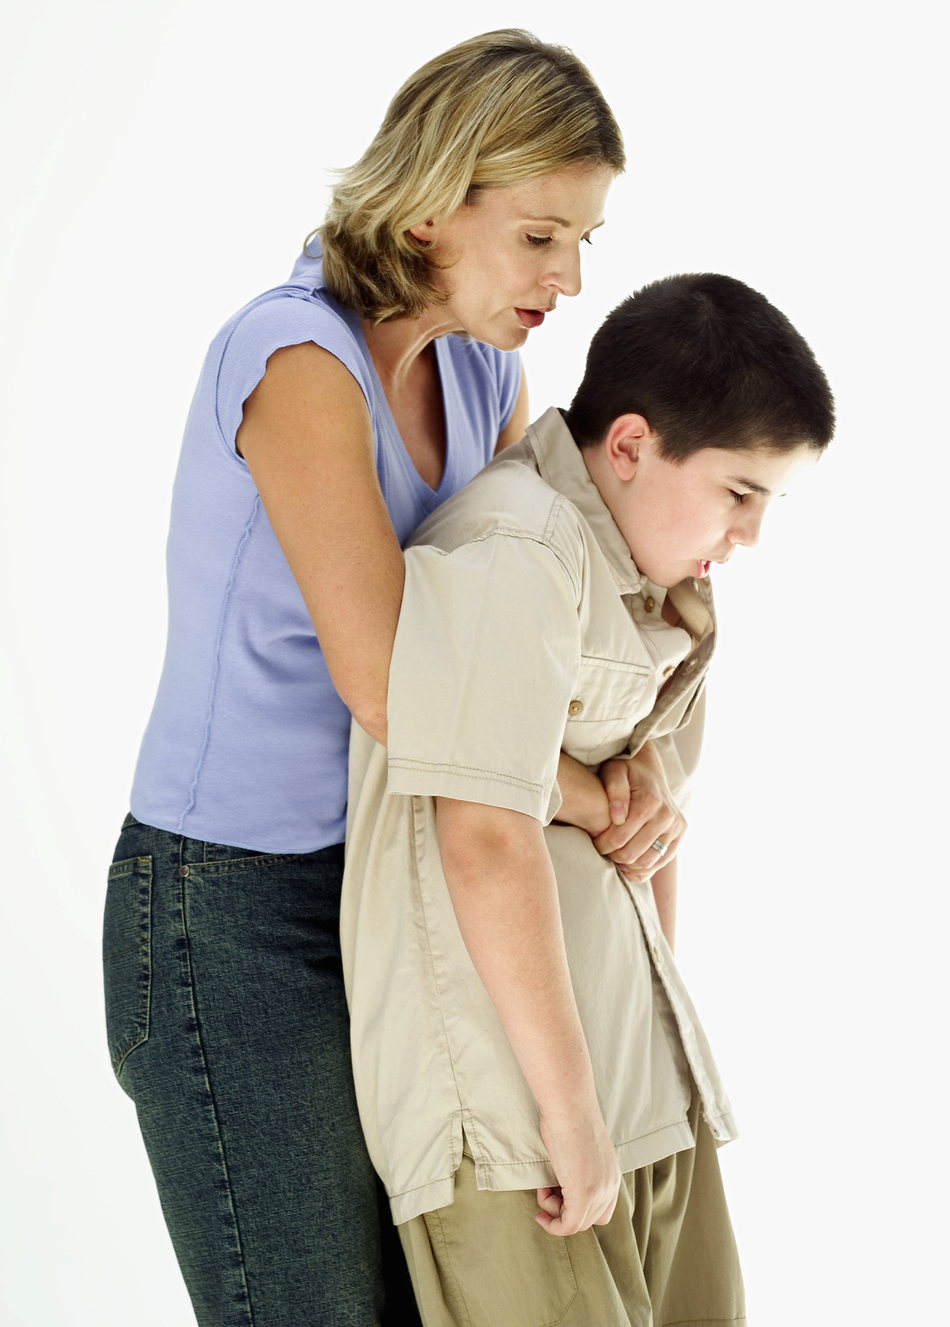 What to Do if A Child is Choking